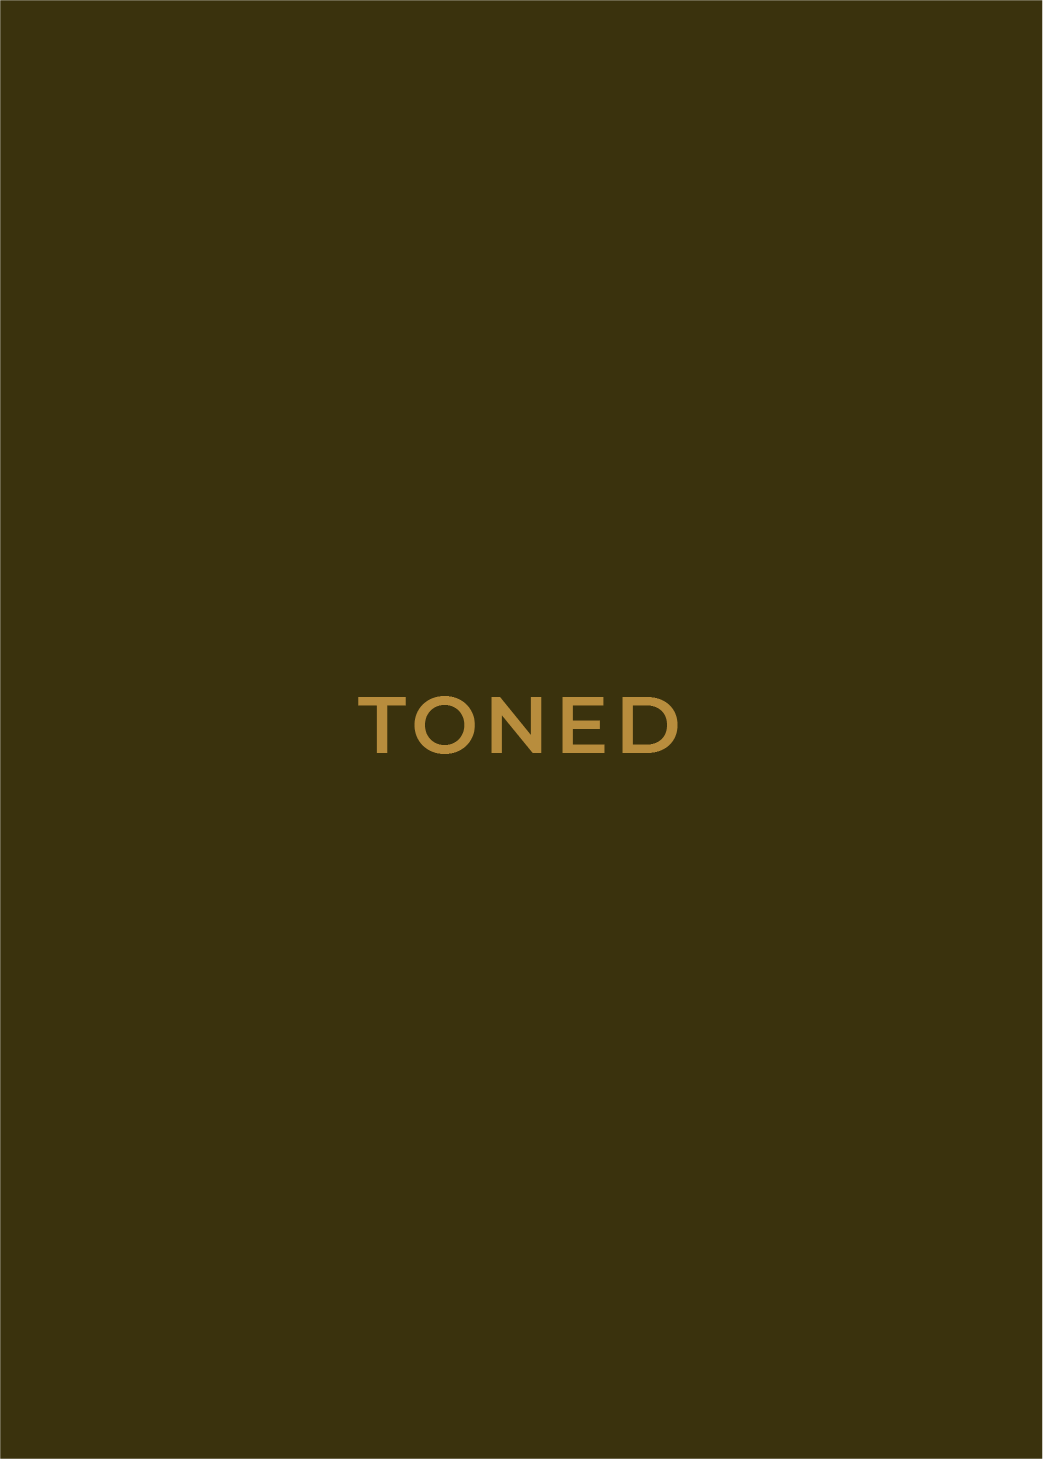 Dark green background with text saying Toned